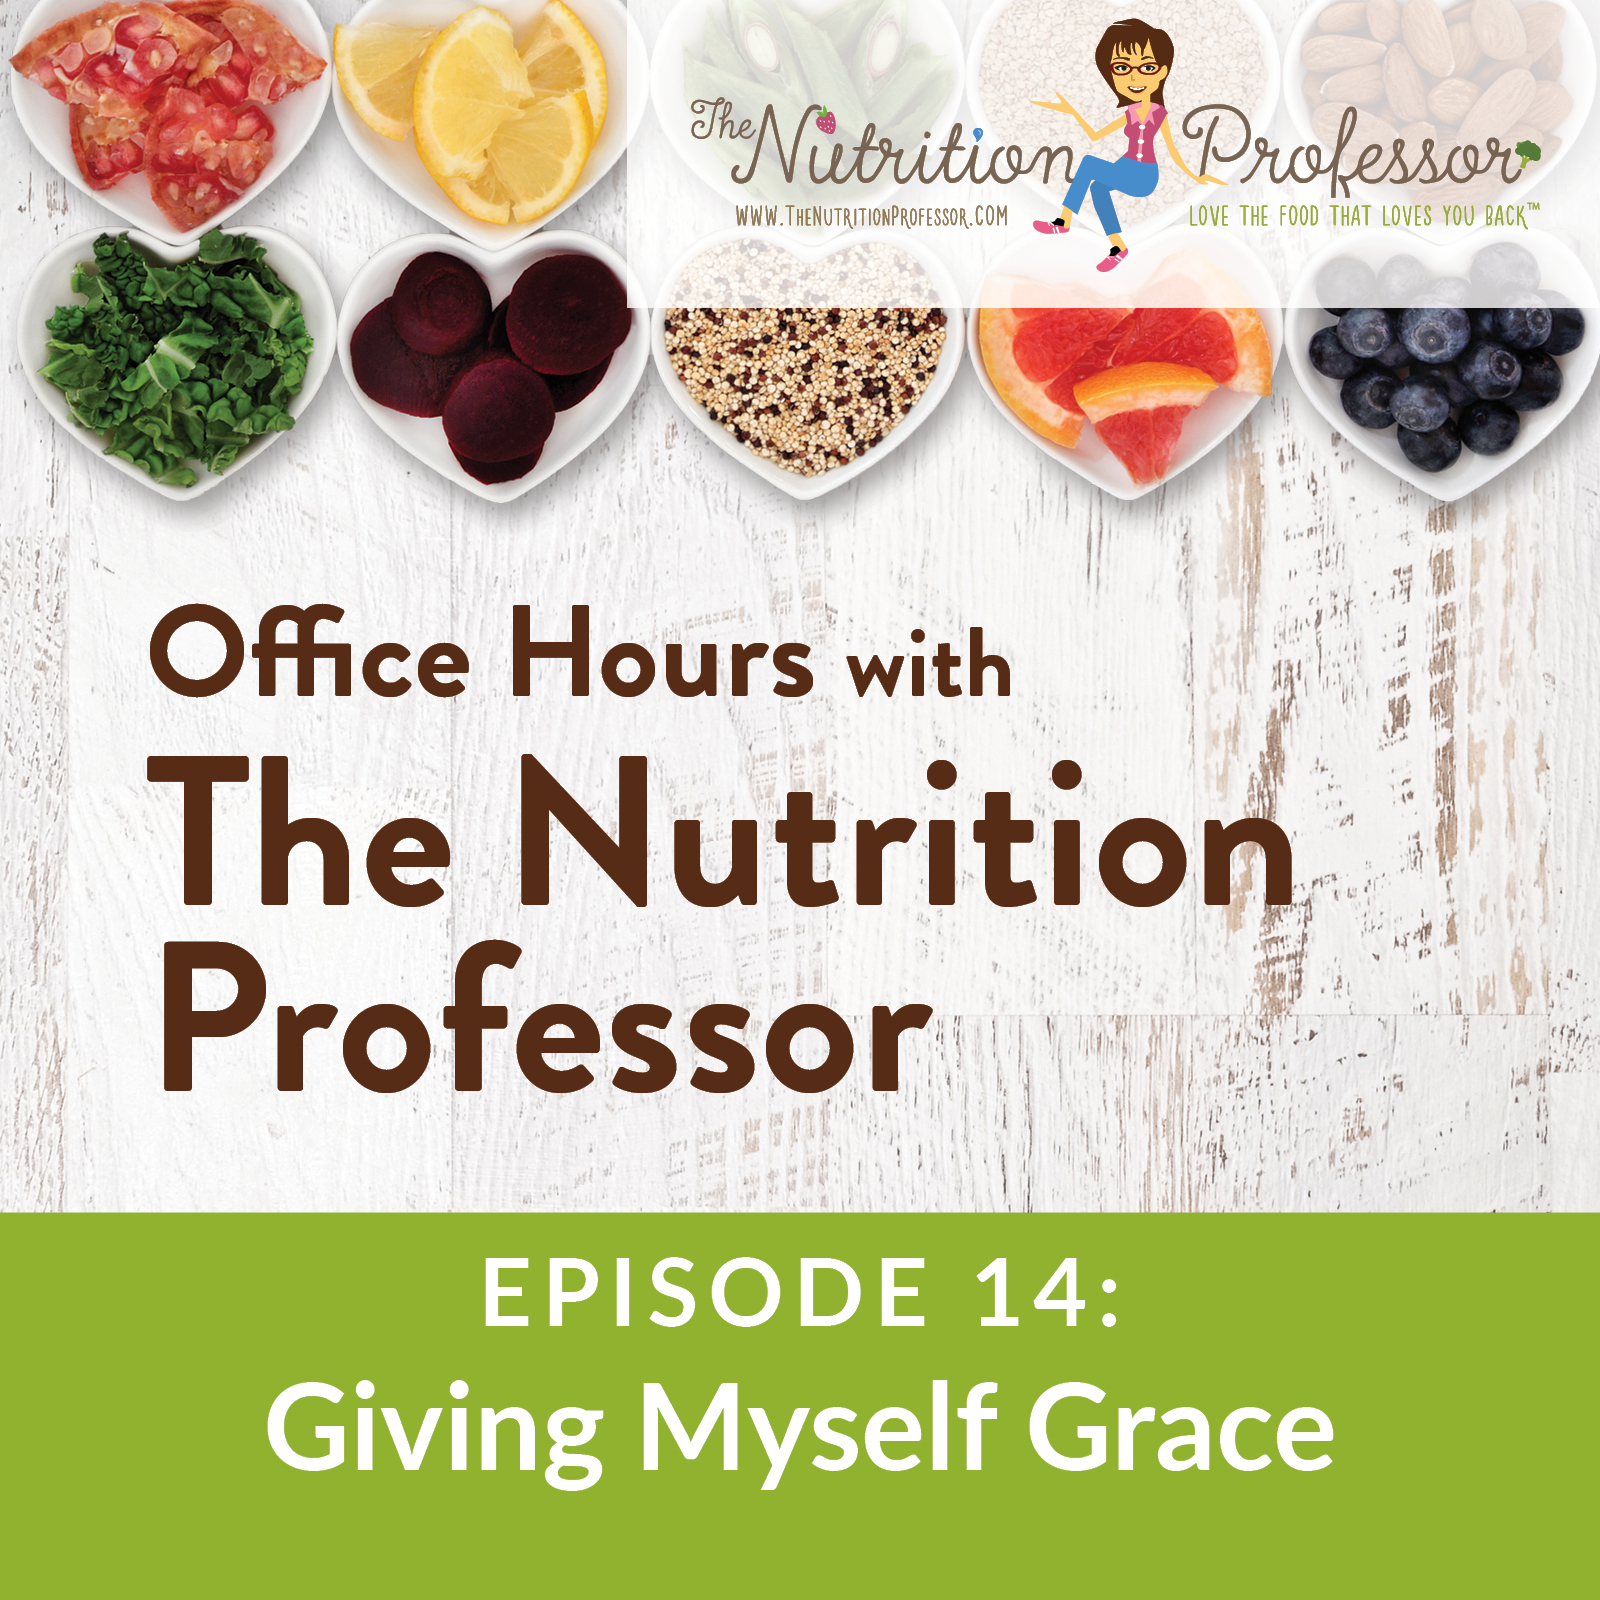 Podcast Episode 14: Giving Myself Grace